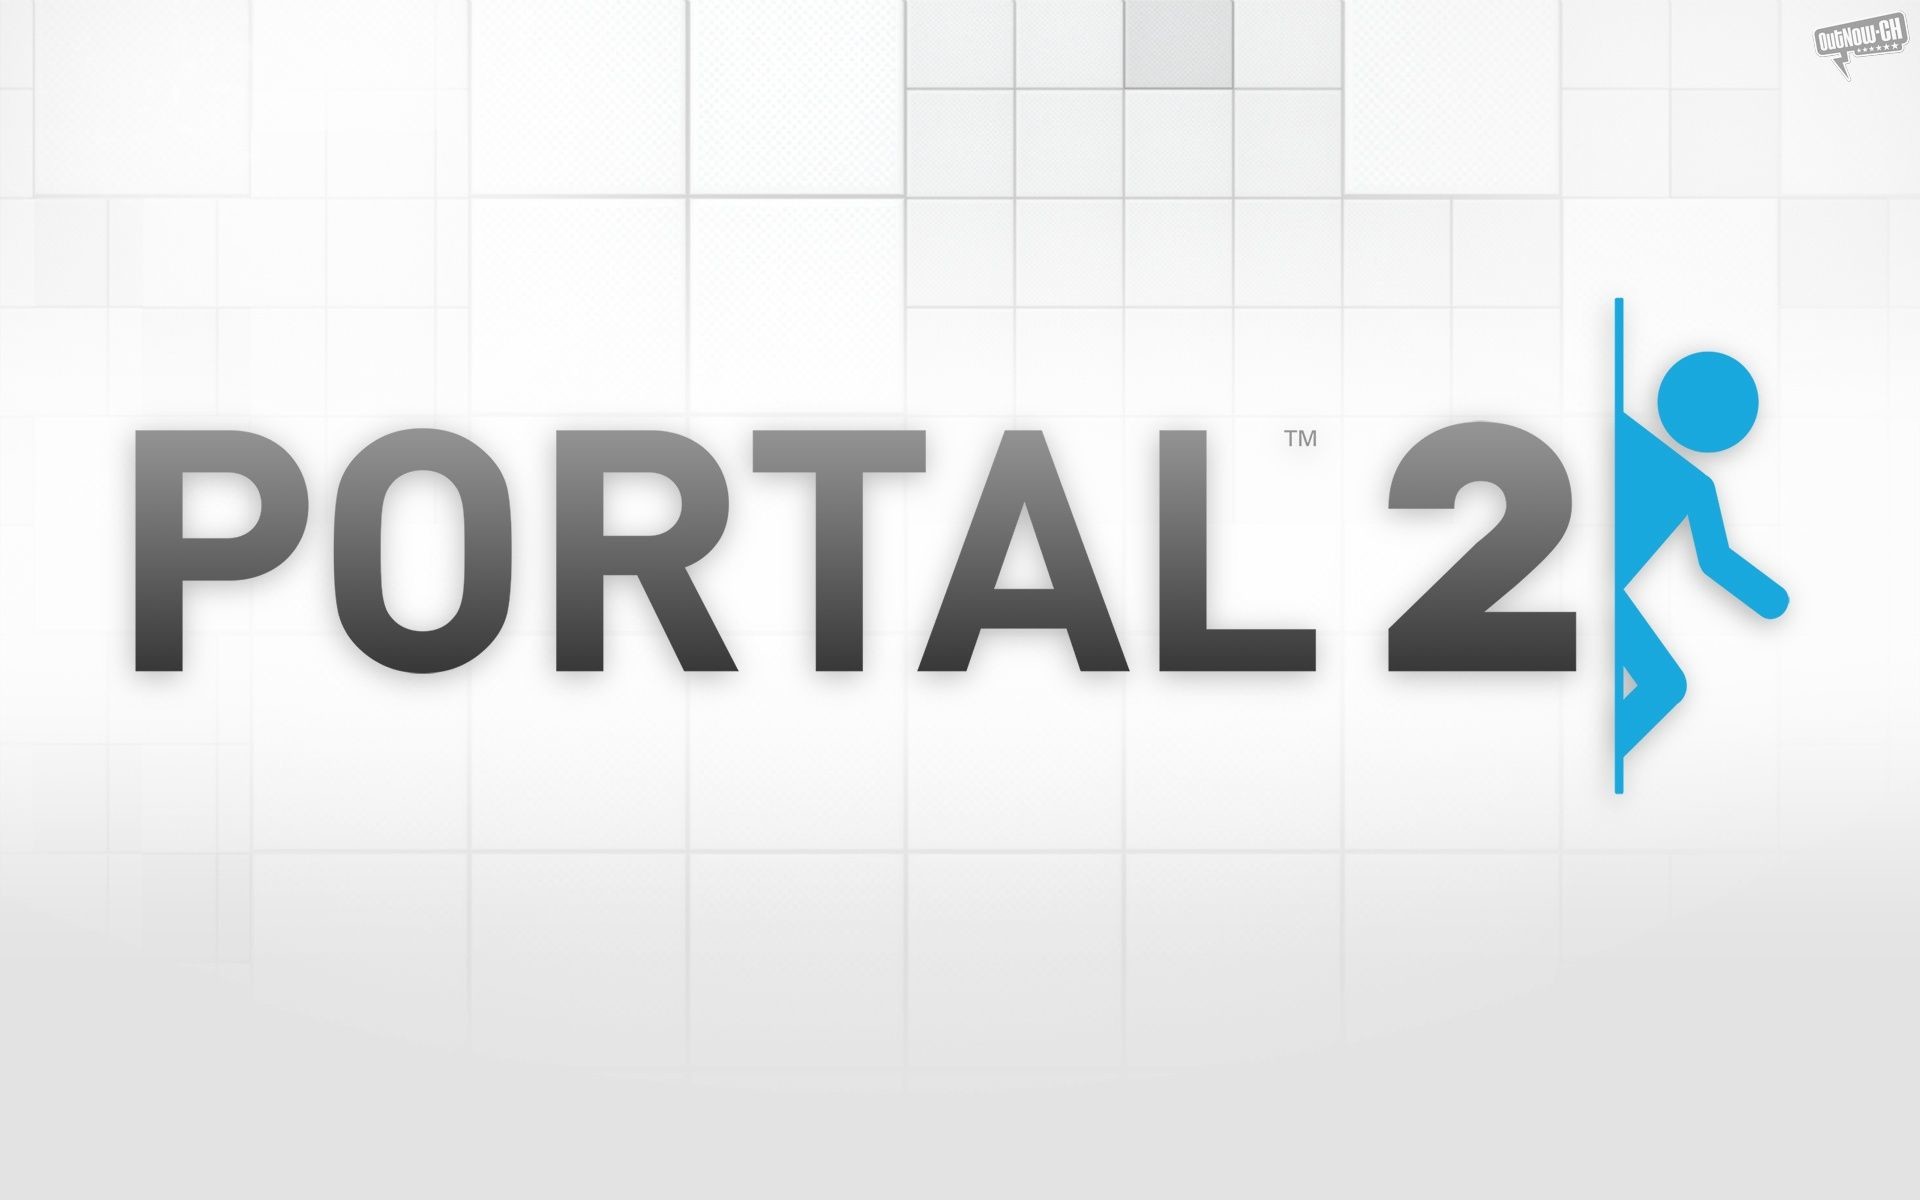 1920x1200 1680x1050 Download the Portal 2 Painting Wallpaper, Portal 2 Painting iPhone  ...">